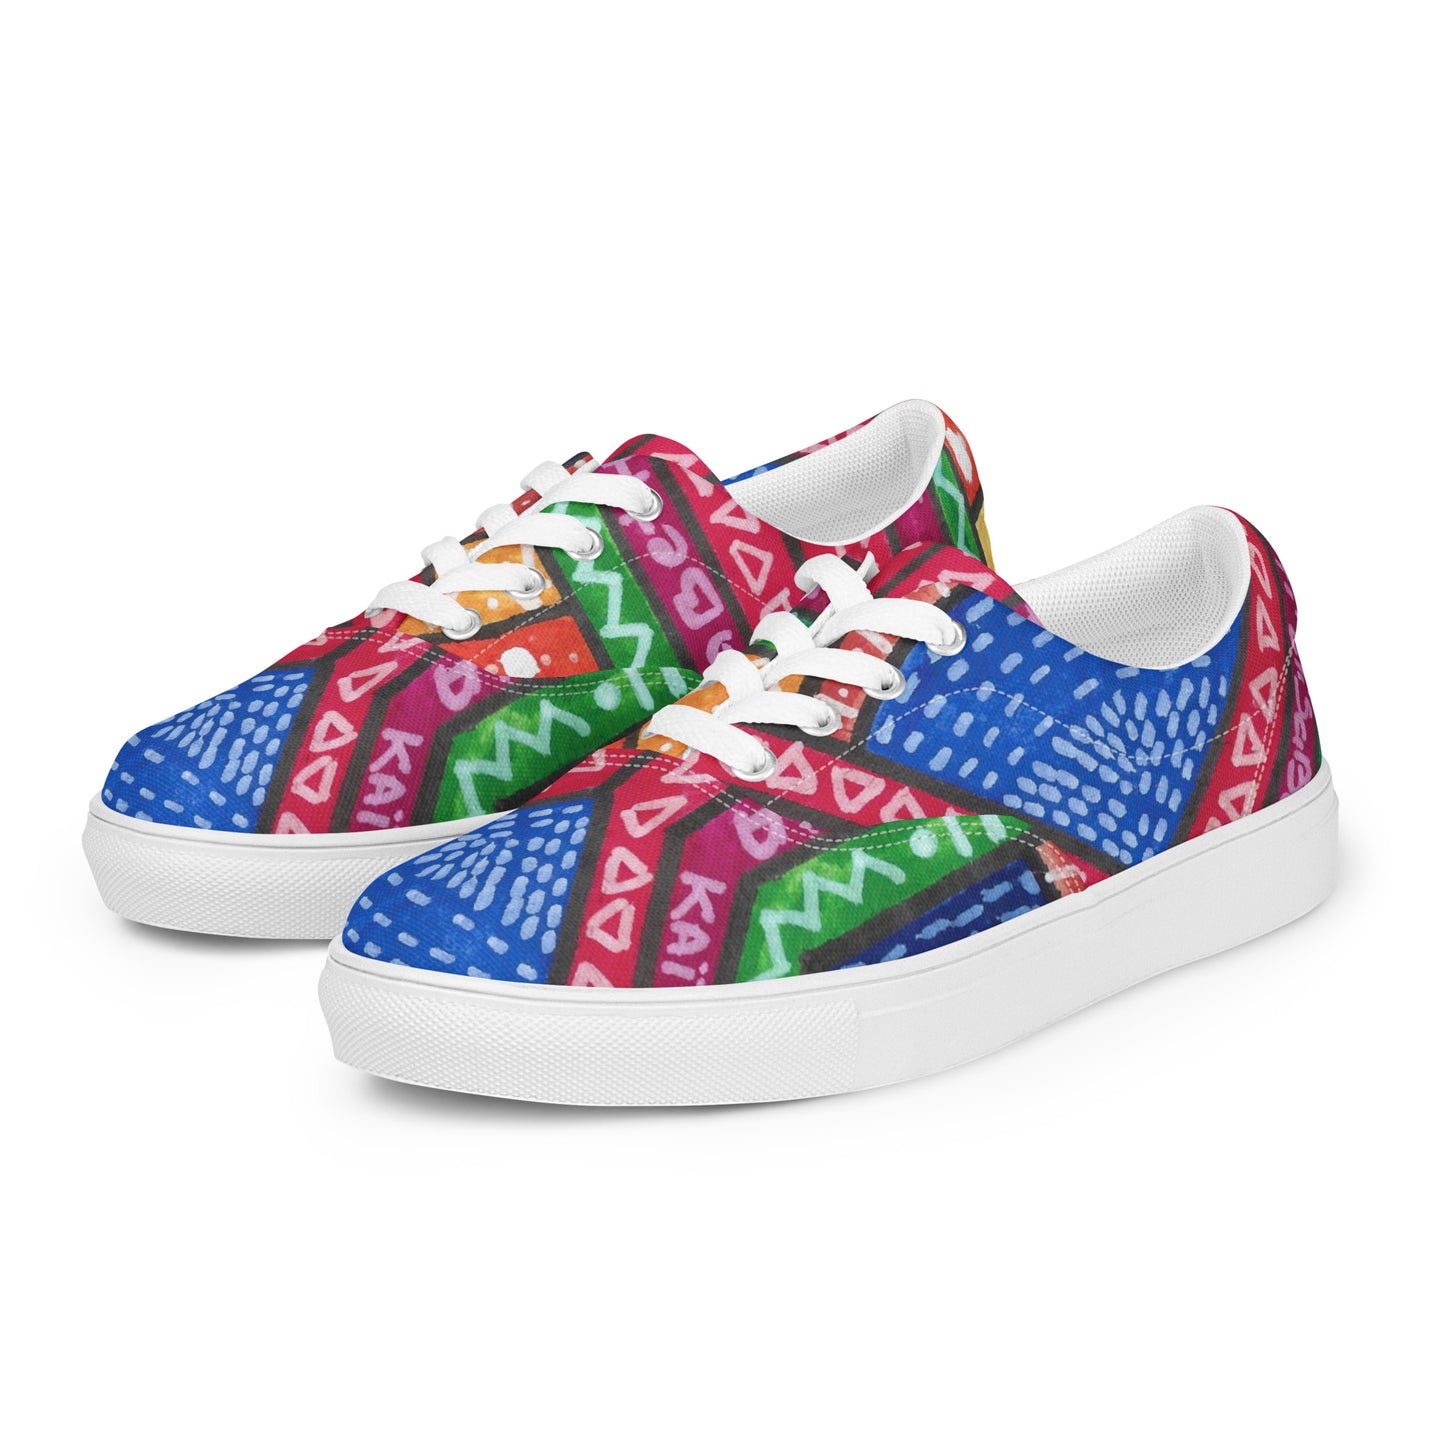 TIYI - Women's canvas trainers with laces